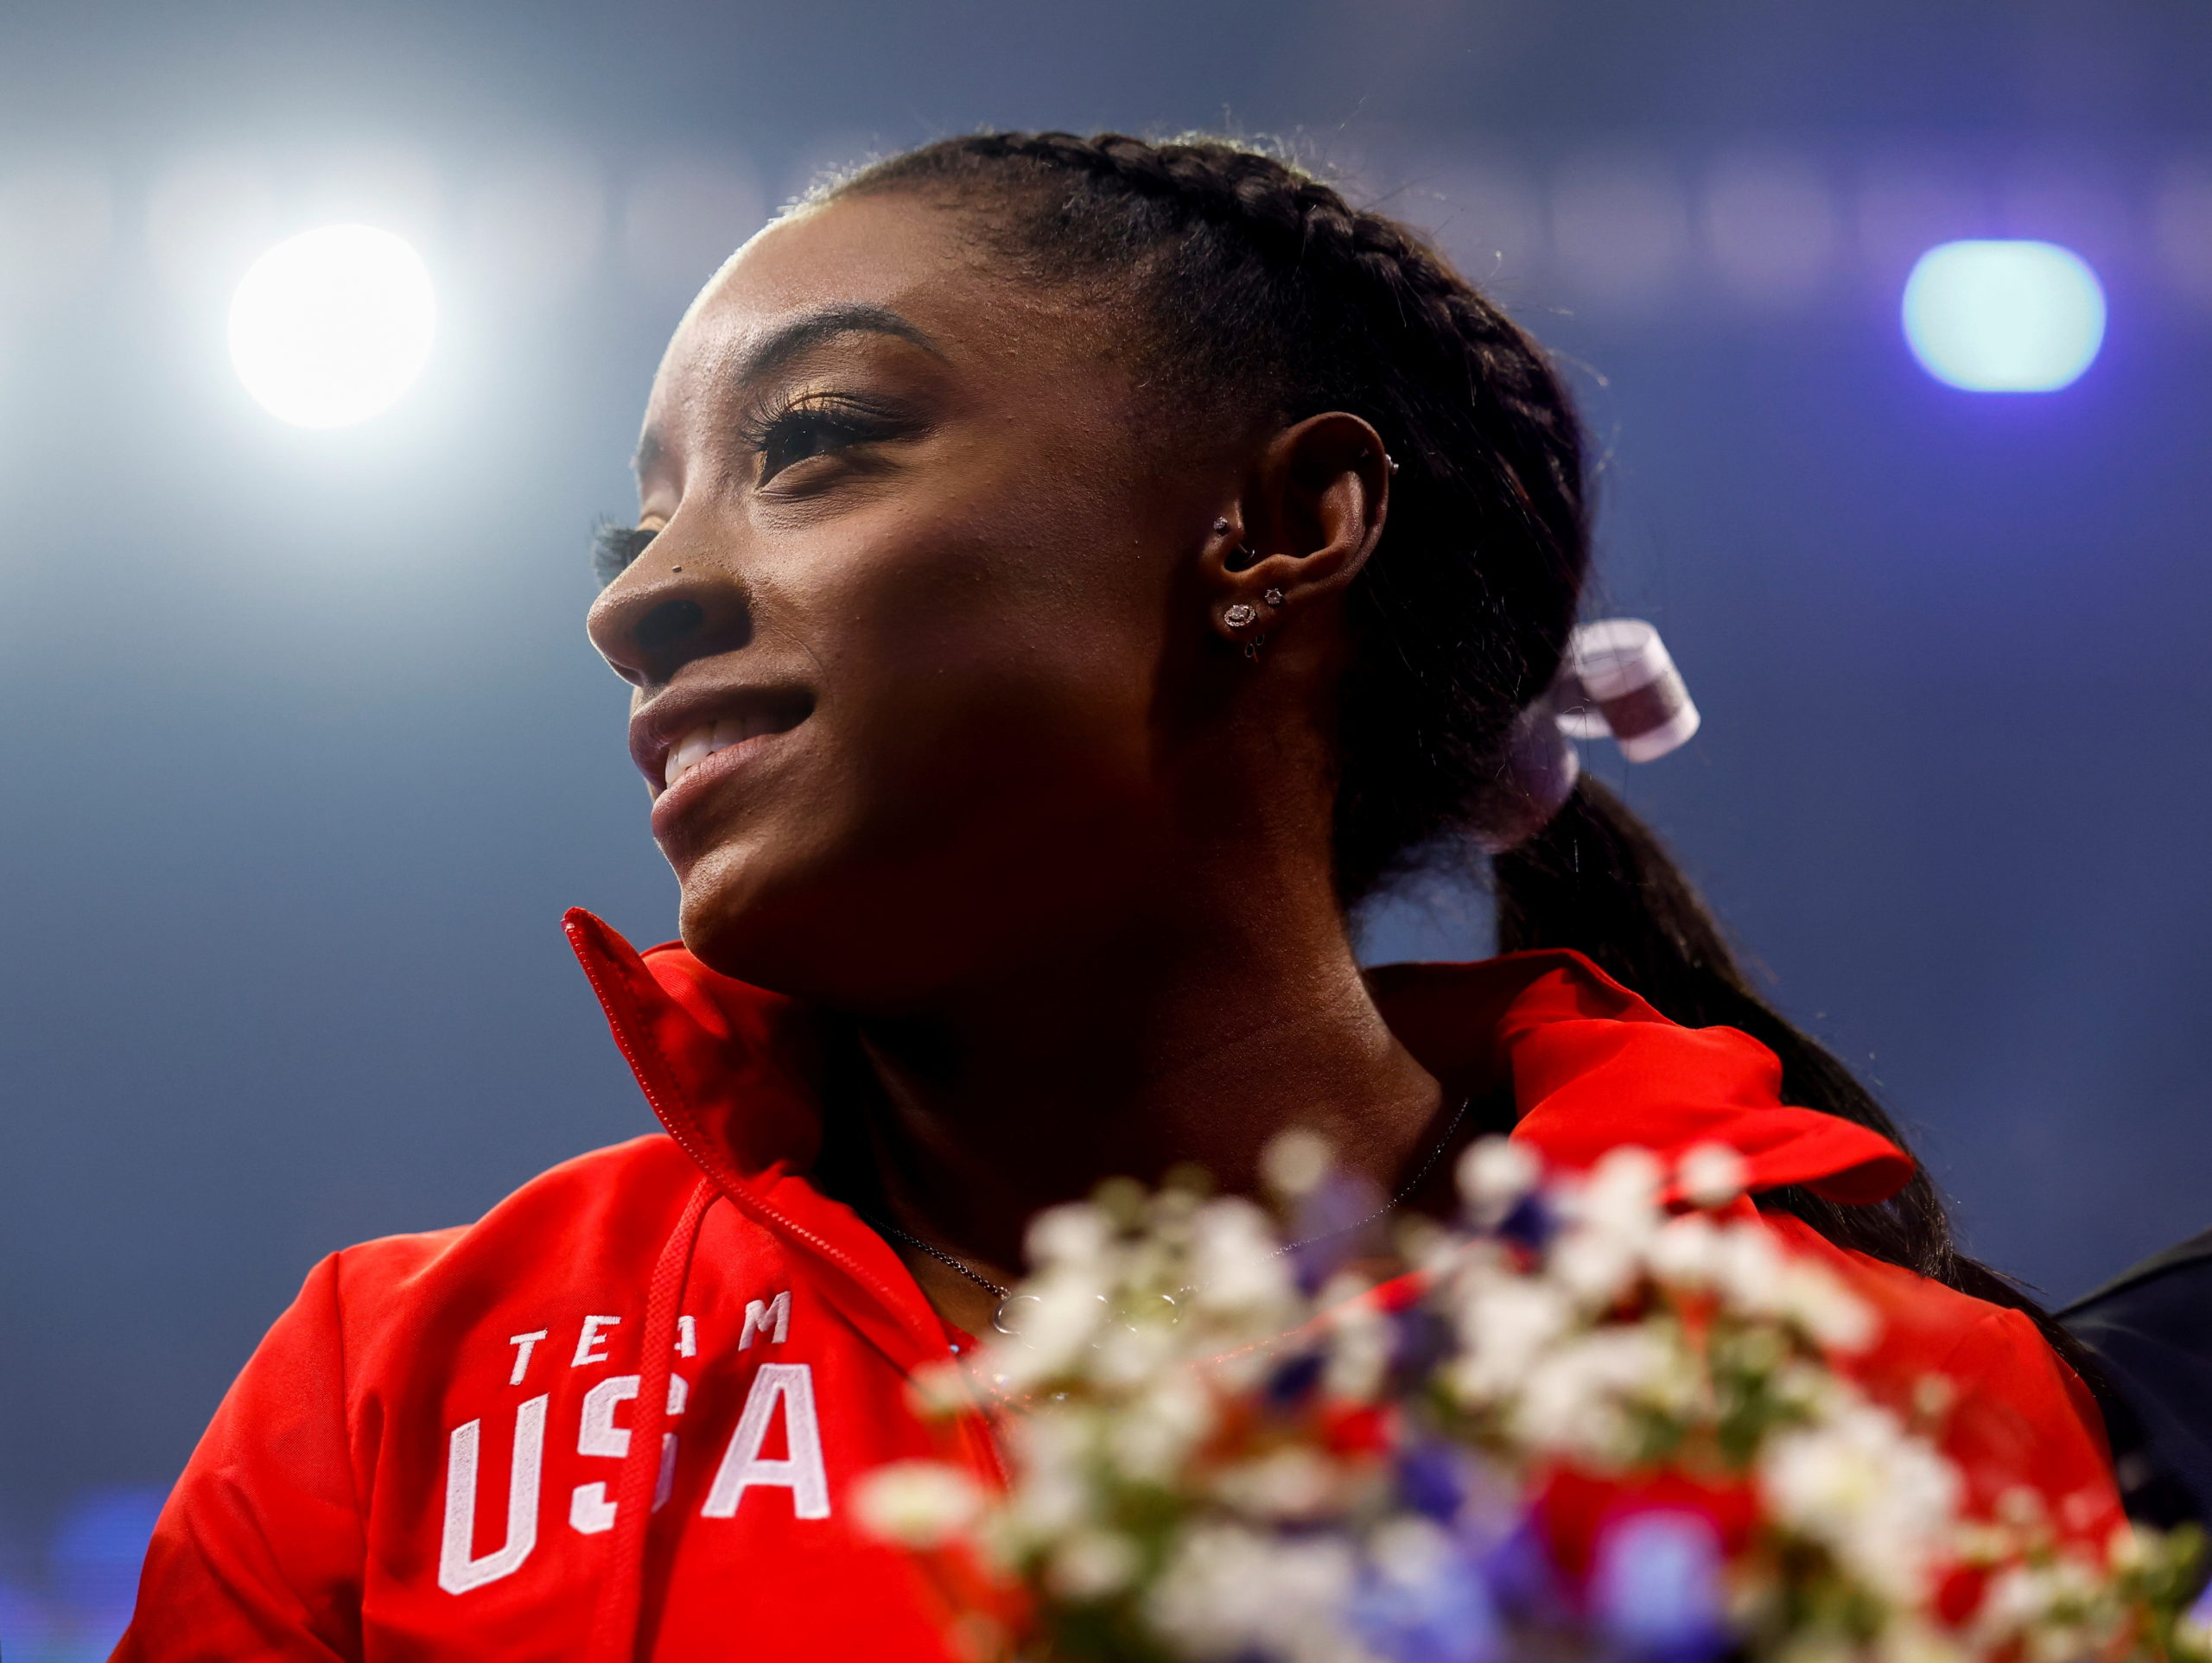 Simone Biles smiles after the closing ceremony in which she was named to the Olympic team during the final day of women's competition in the U.S. Olympic Team Trials for gymnastics in St. Louis, Missouri, U.S., June 27, 2021.